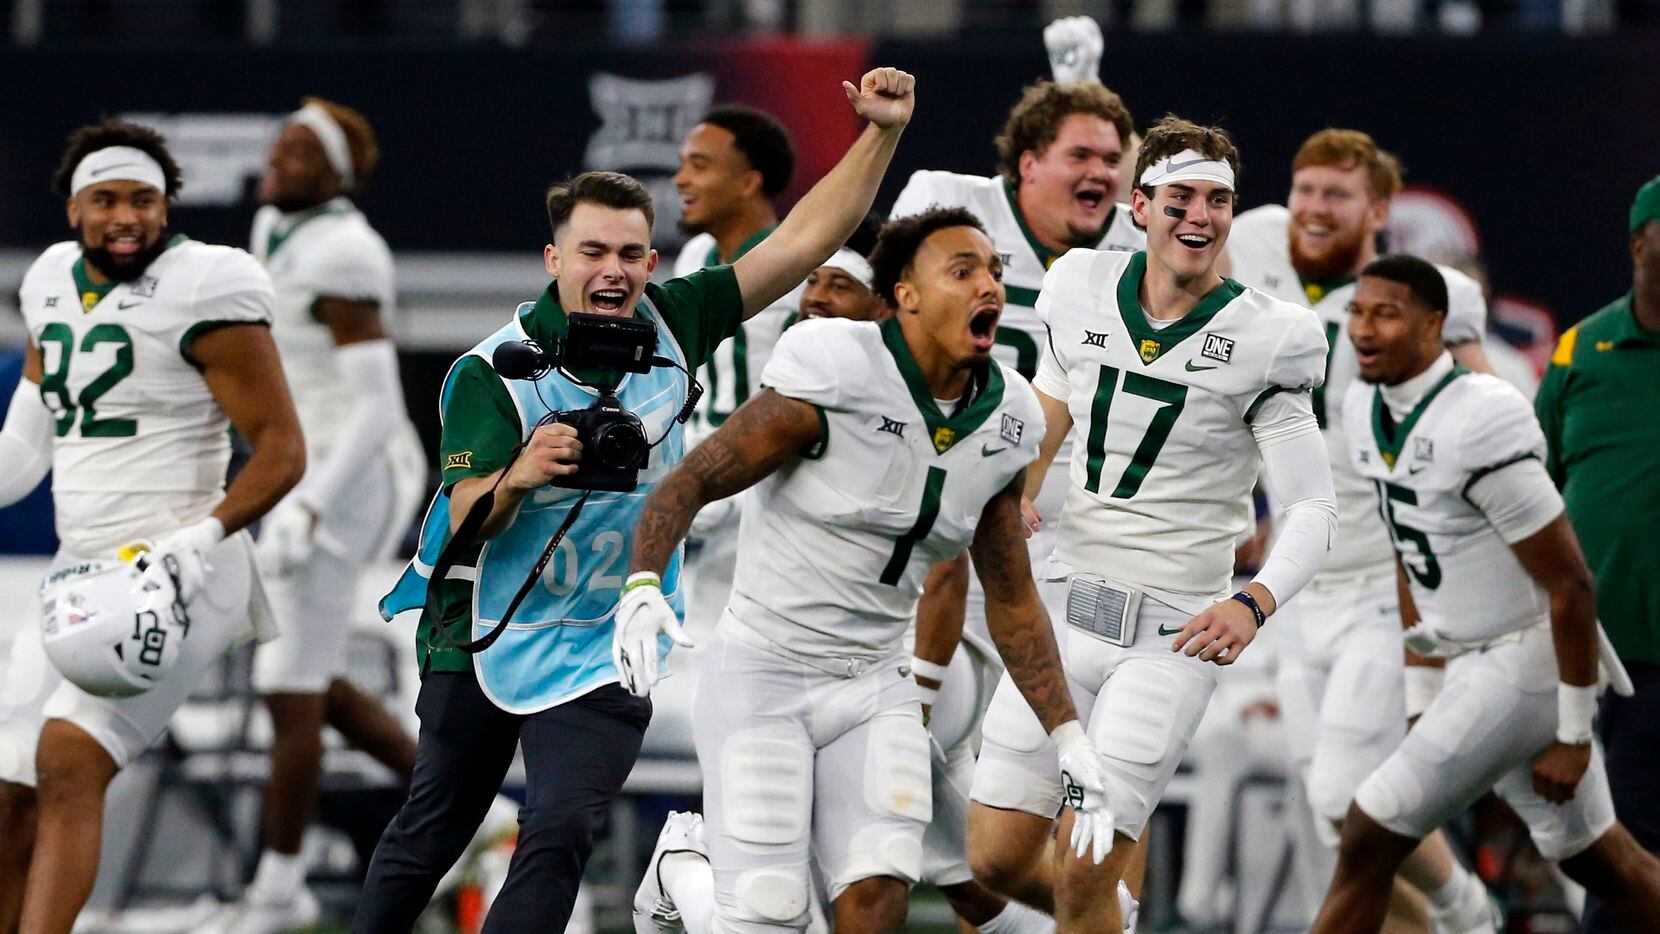 A school photographer (blue smock) celebrates with Baylor Bears running back Trestan Ebner (1) and the remainder of the Baylor bench at the end of  the Big 12 Championship football game against Oklahoma State at AT&T Stadium in Arlington on Saturday, December 4, 2021. Baylor won 21-16.